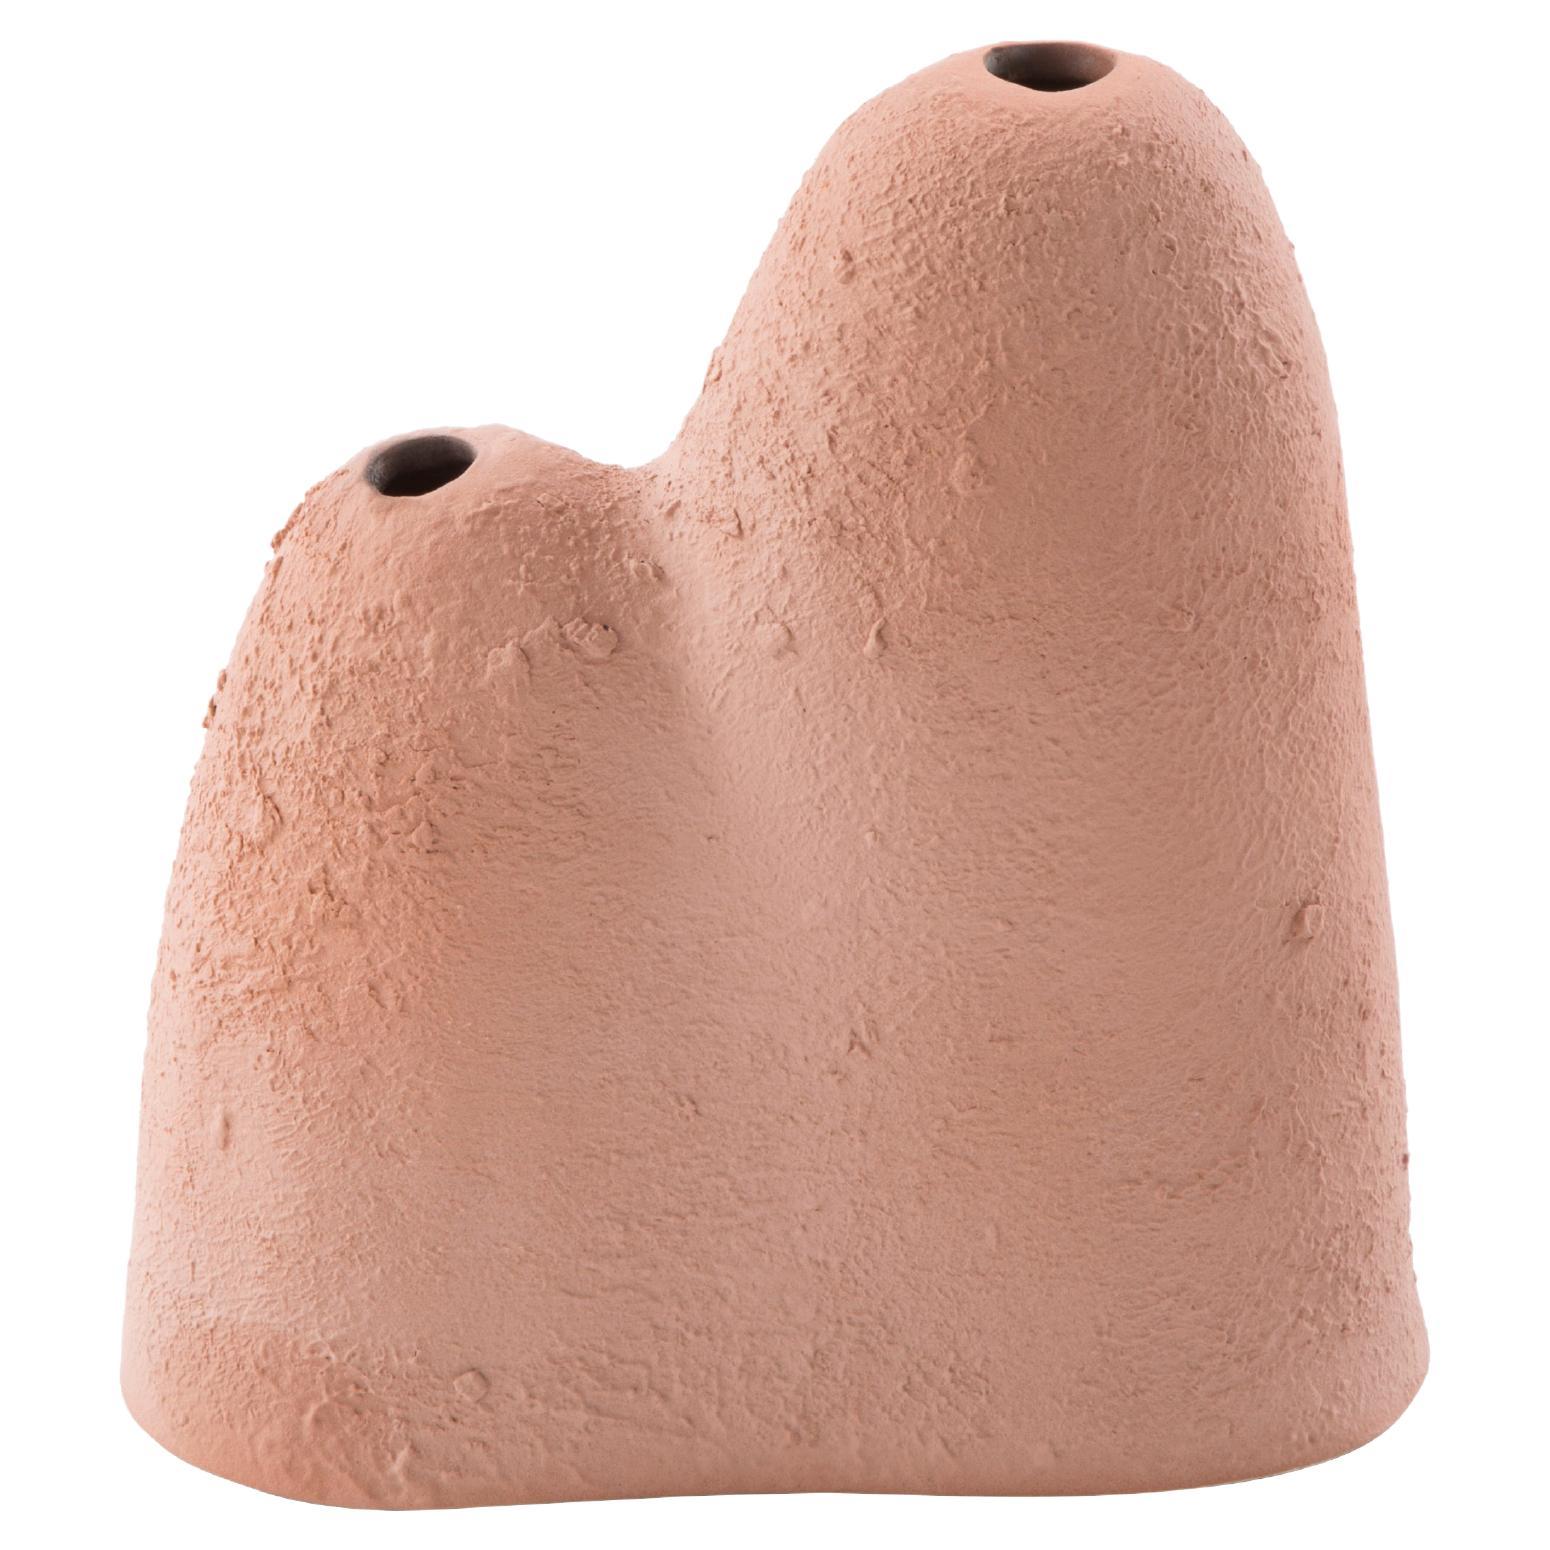 Mountain Small Terracotta Vase by Pulpo